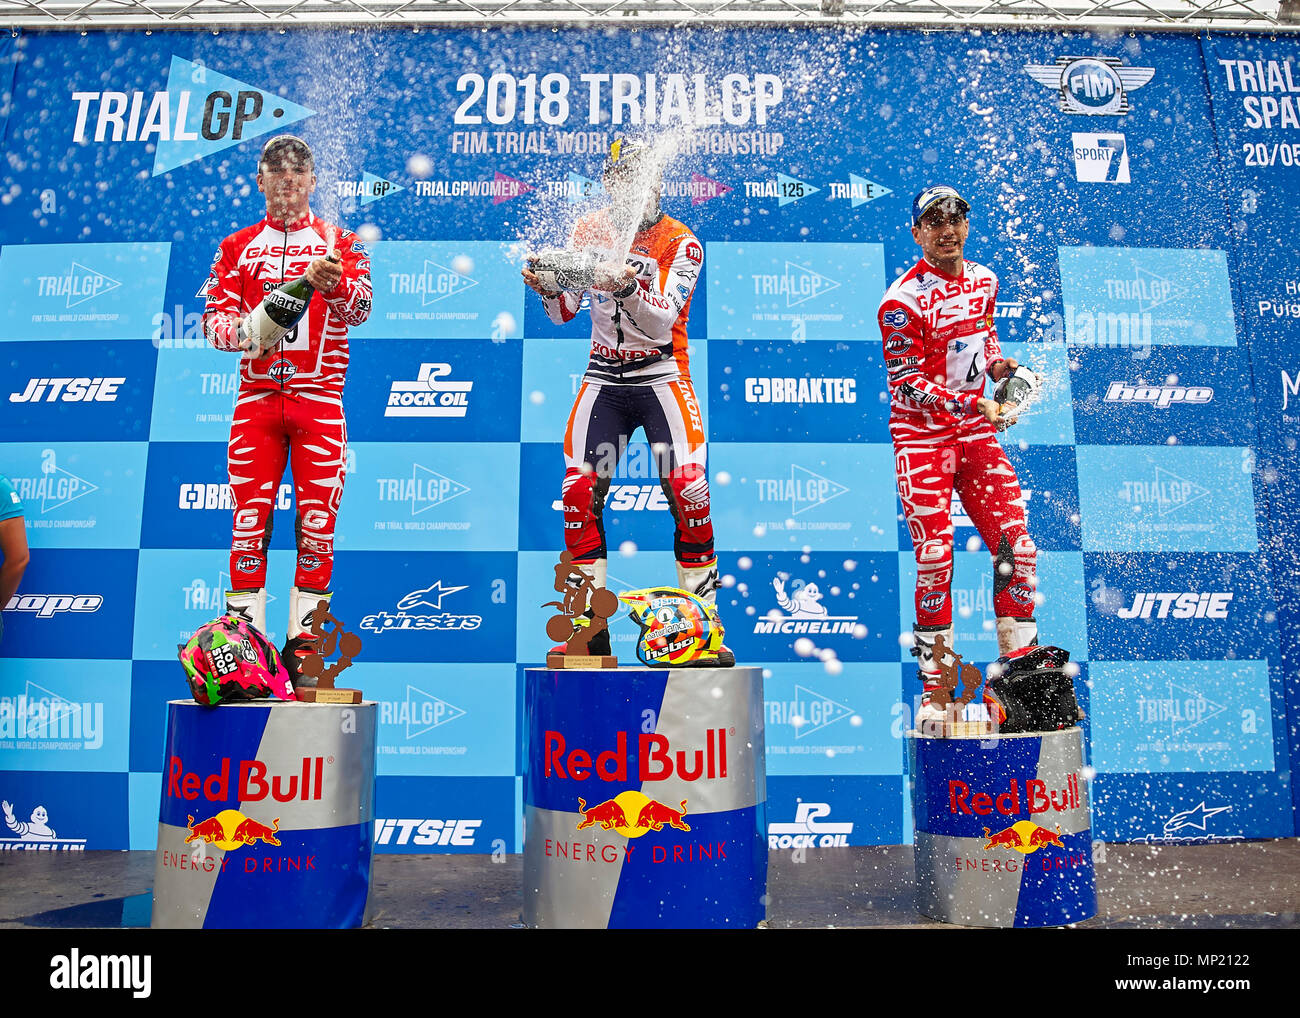 Camprodon, Girona, Spain. 20th May, 2018. FIM Trial World Championships, Spain; (L-R) Jaime Busto of the TrialGP class (2nd place), Toni Bou of the TrialGP class (1st place), and Jeroni Fajardo of the TrialGP class (3rd place) celebrate at the podium Credit: Action Plus Sports/Alamy Live News Stock Photo